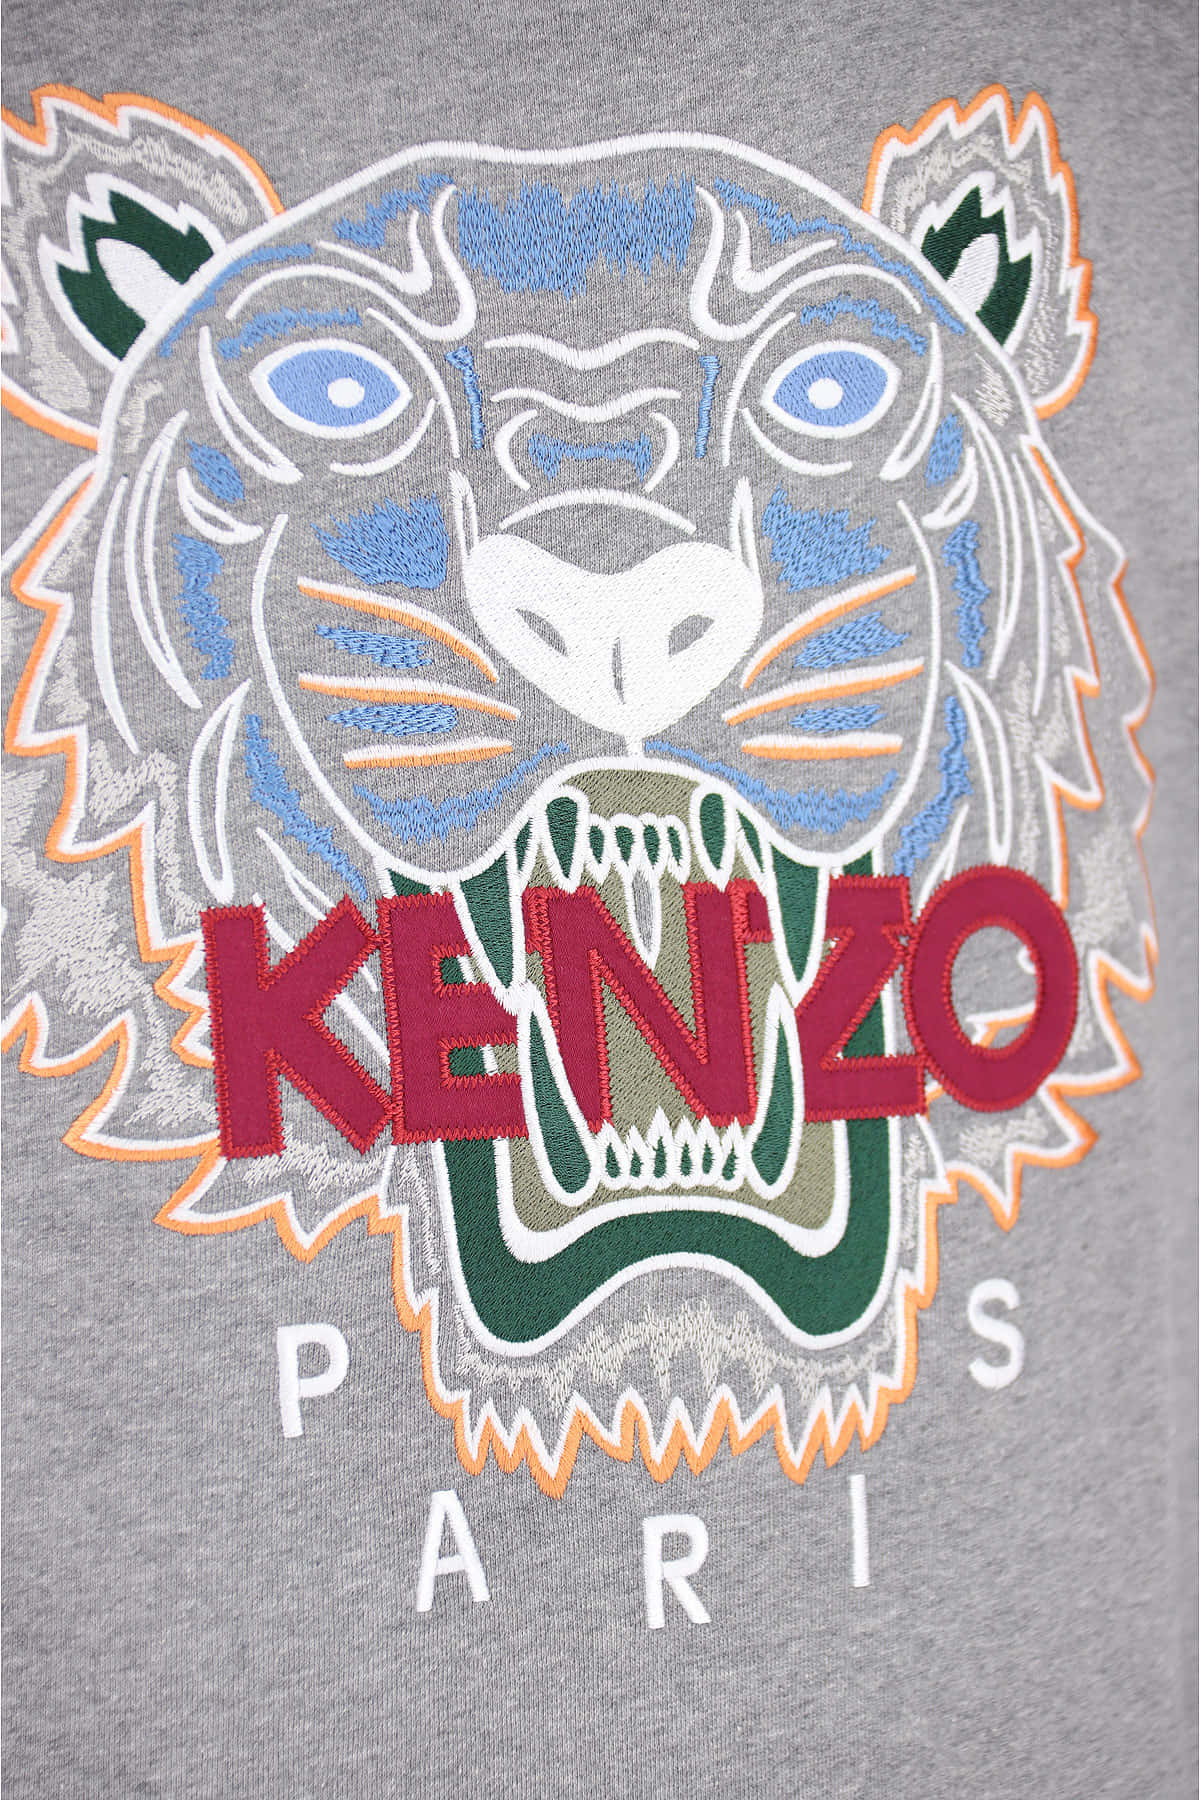 Download Embroidered Kenzo Tiger Logo Wallpaper | Wallpapers.com